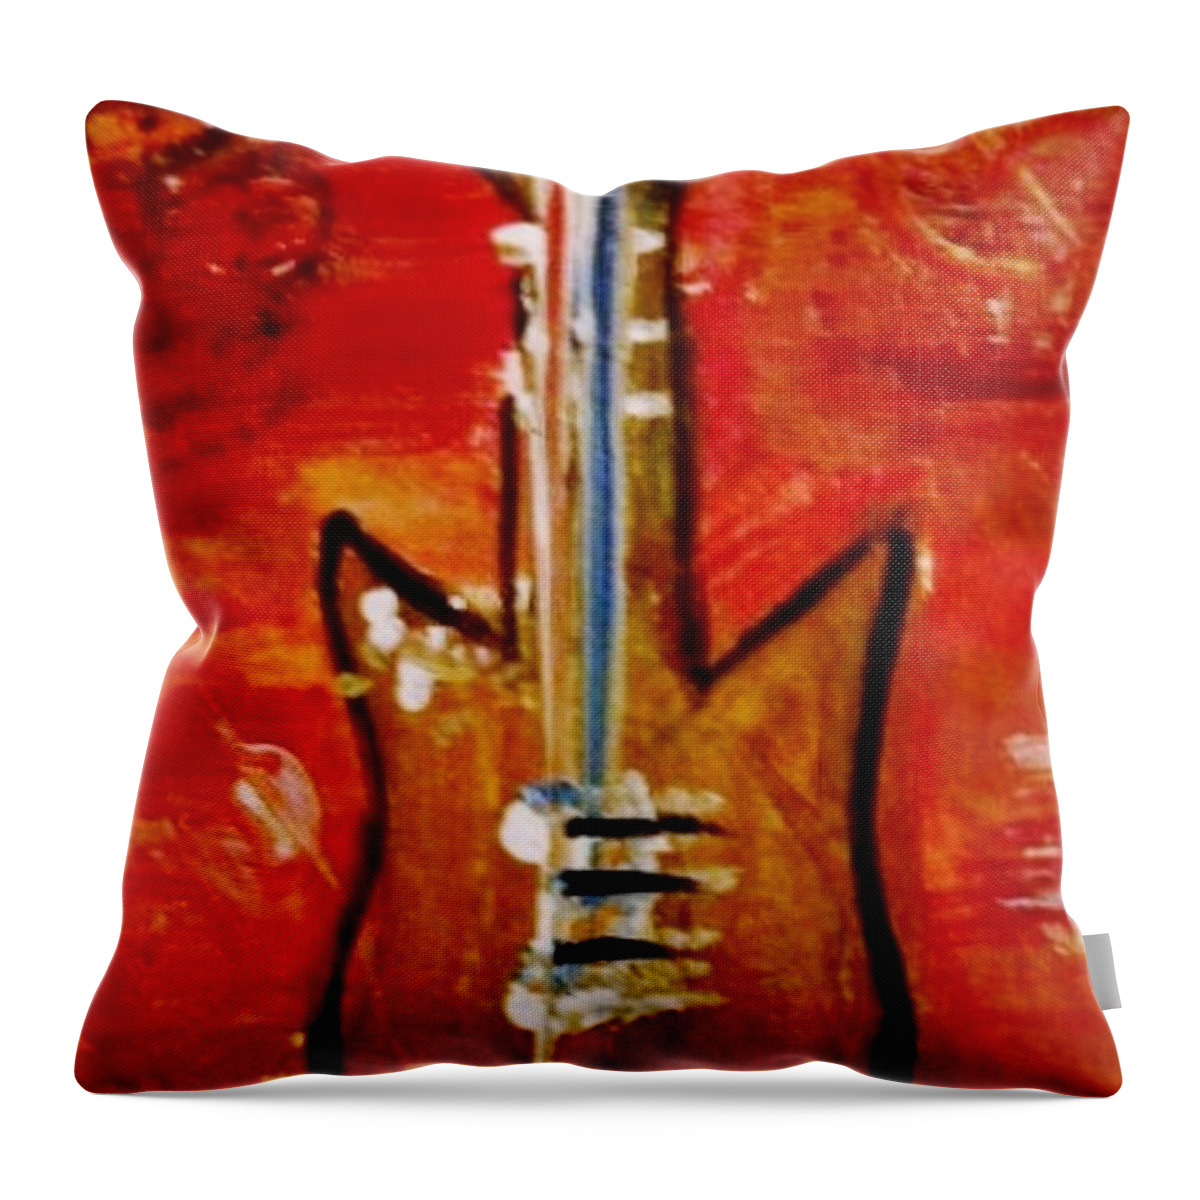 Bass Throw Pillow featuring the painting Bass Guitar 1 by Kelly M Turner